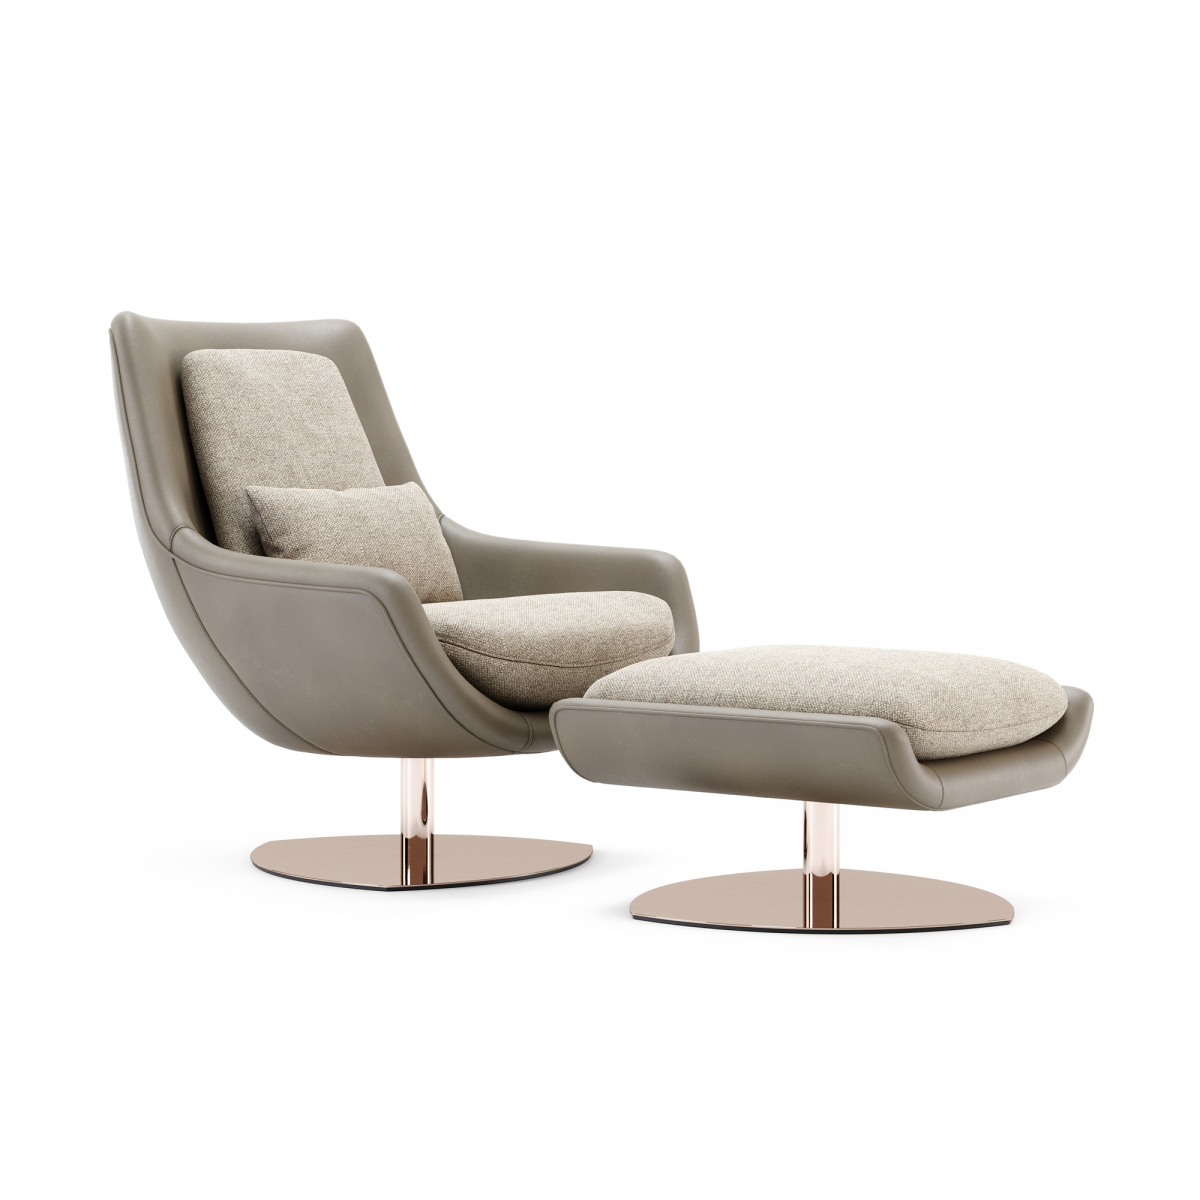 ELBA Armchair Leather and Fabric